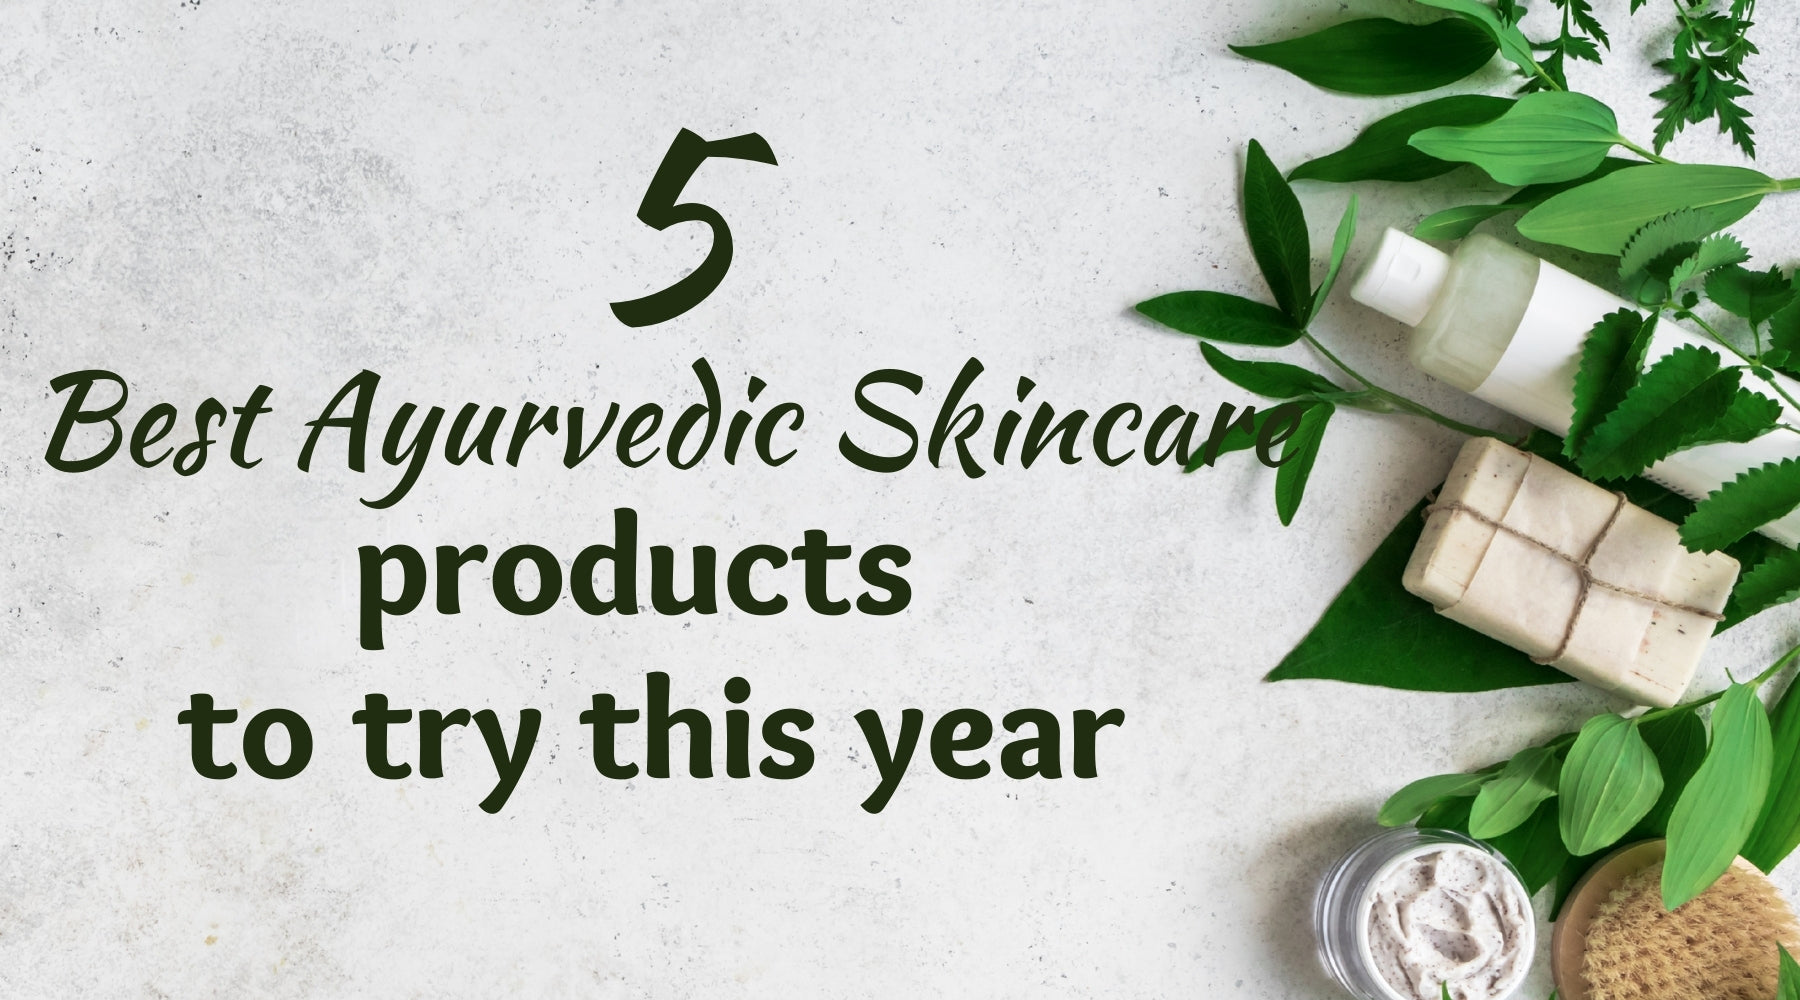 Five Best Ayurvedic Skincare products to try this year